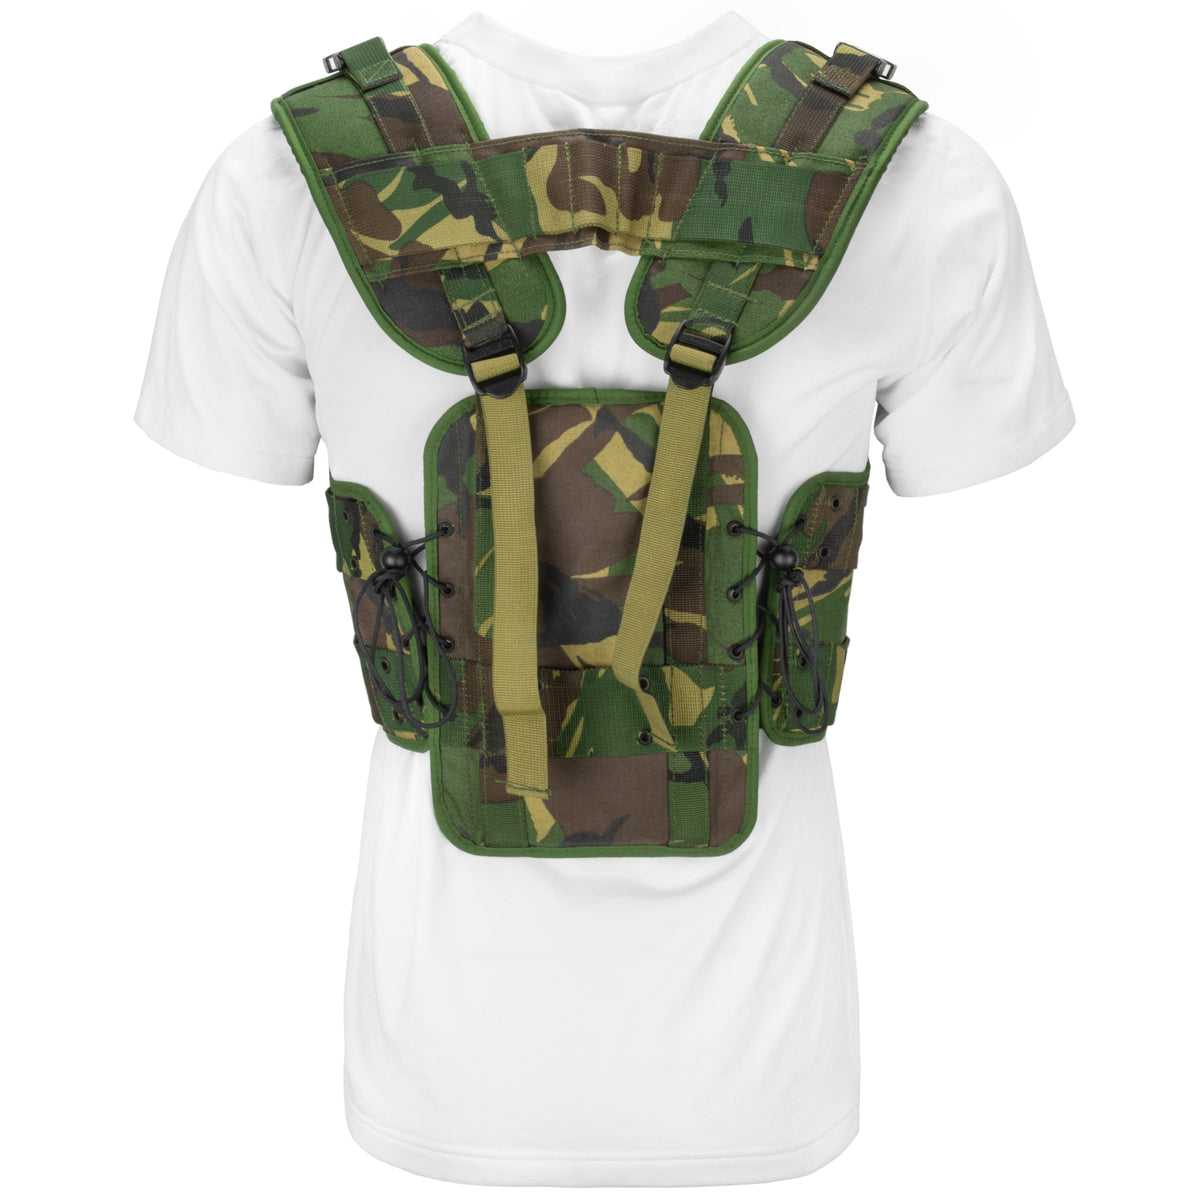 Dutch Military Sewing Kit (Woodland Camouflage) – Make Simple